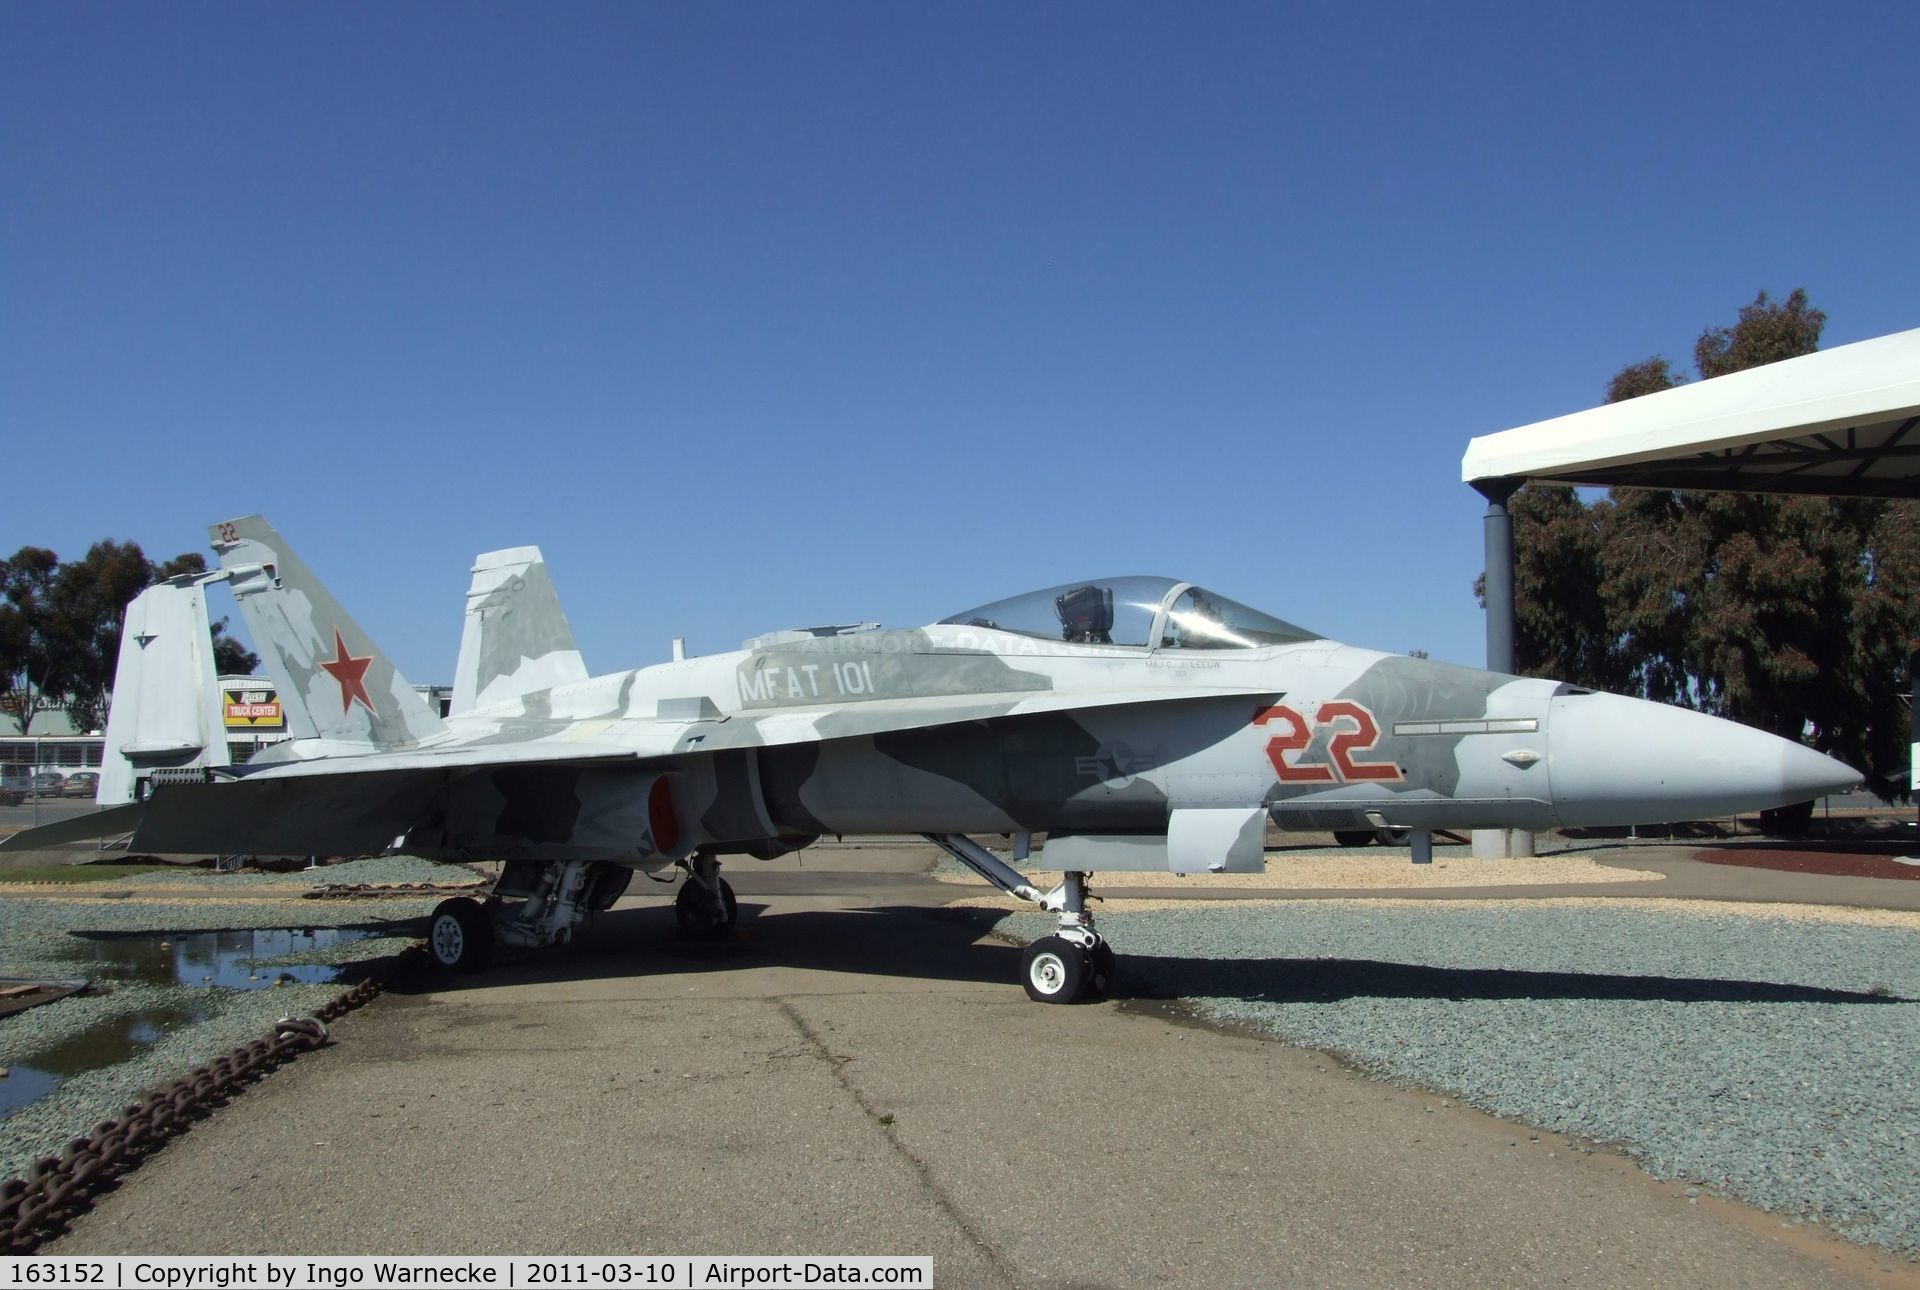 163152, McDonnell Douglas F/A-18A Hornet C/N 0576, McDonnell Douglas F/A-18A Hornet at the Flying Leatherneck Aviation Museum, Miramar CA